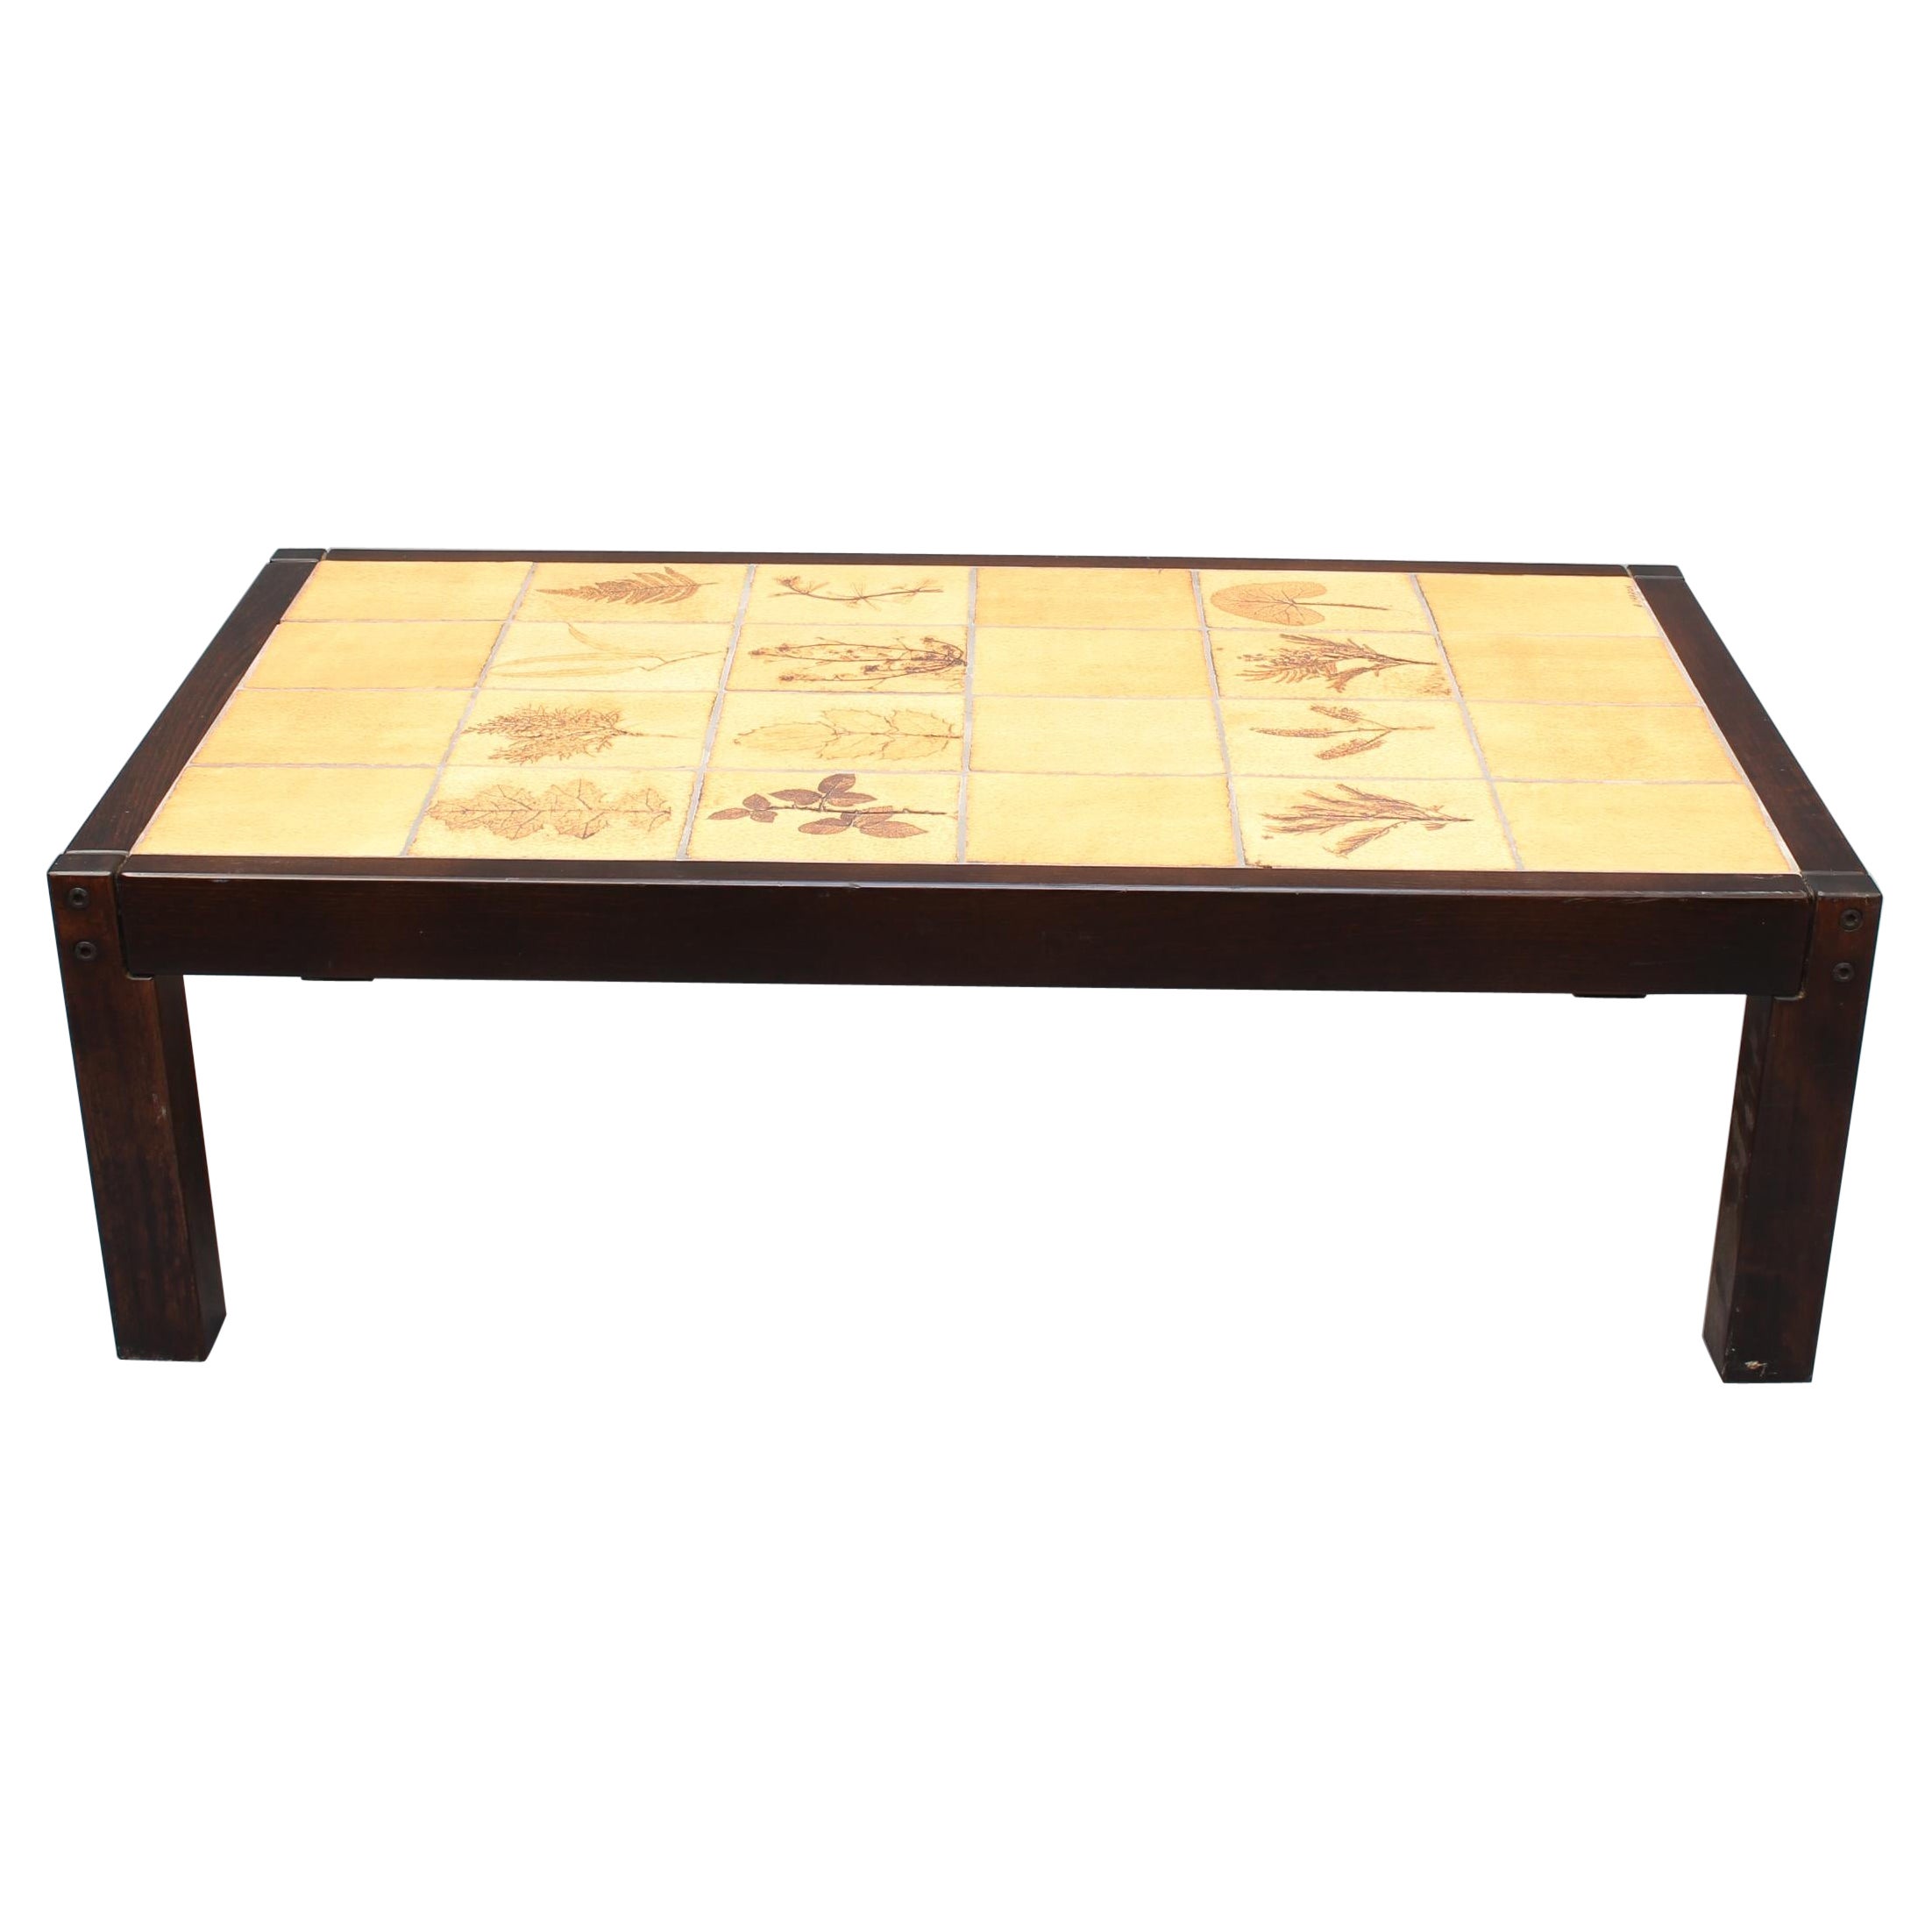 Vintage French Coffee Table with Leaf Motif Tiles by Roger Capron (circa 1970s) For Sale